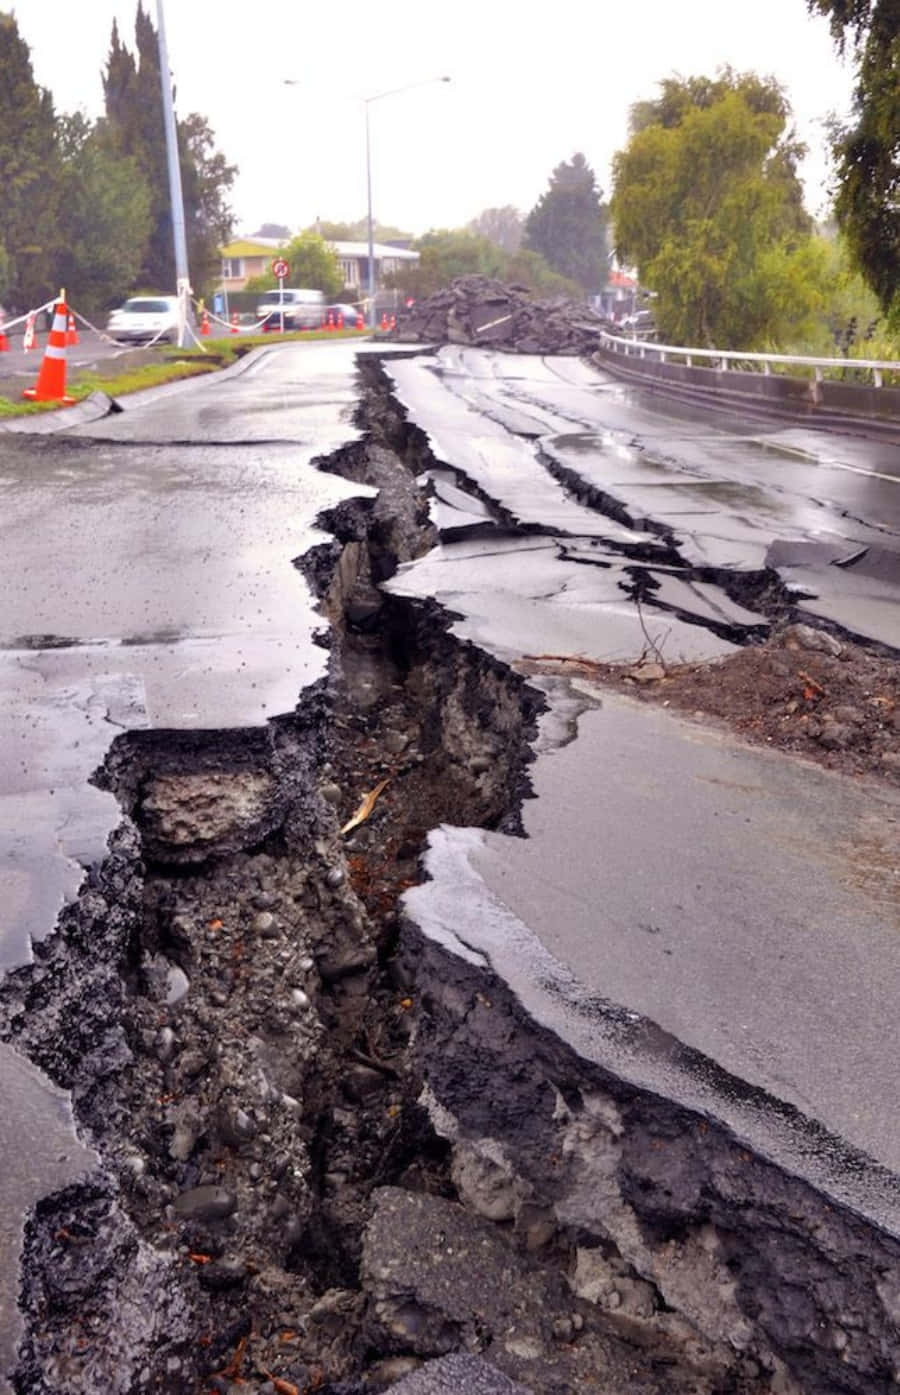 Earthquakes are a natural disaster that can cause destruction.